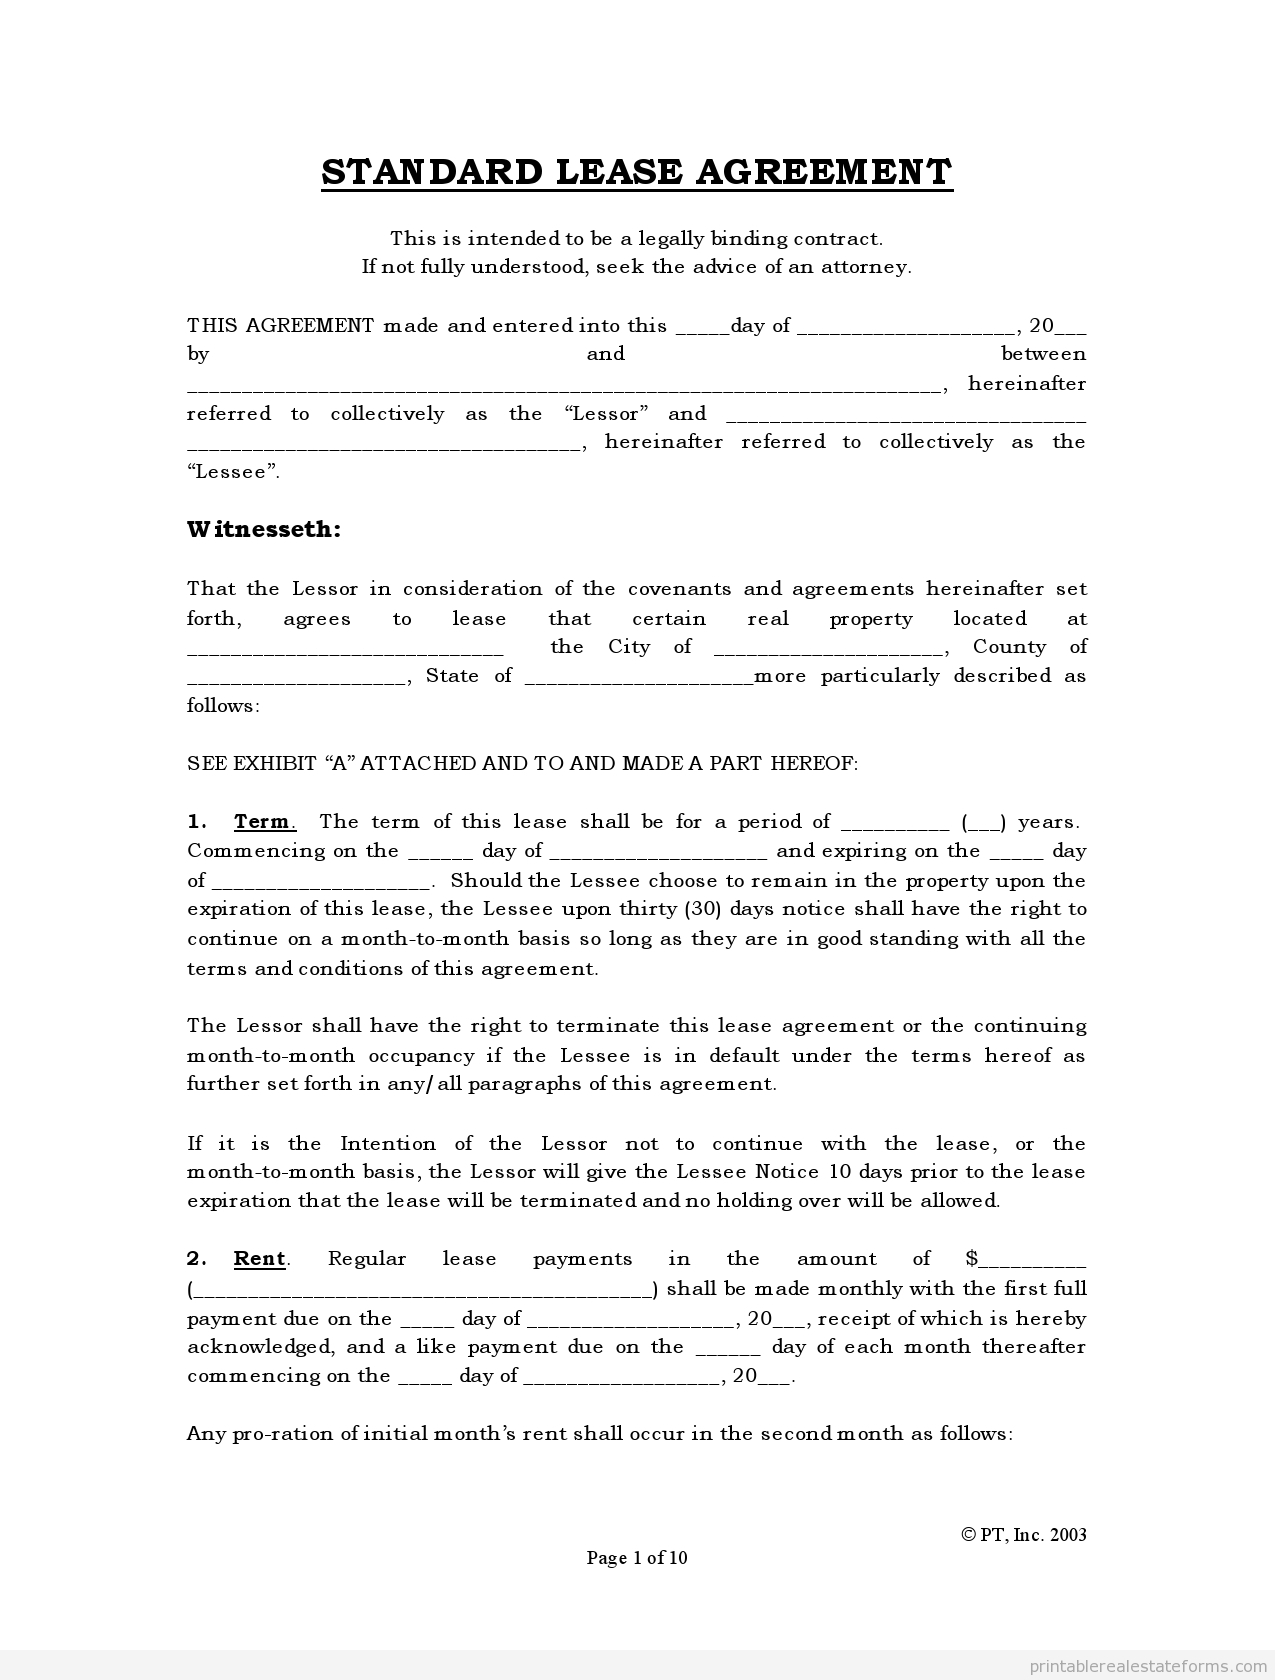 Free Rental Agreements To Print | Free Standard Lease Agreement Form - Free Printable California Residential Lease Agreement